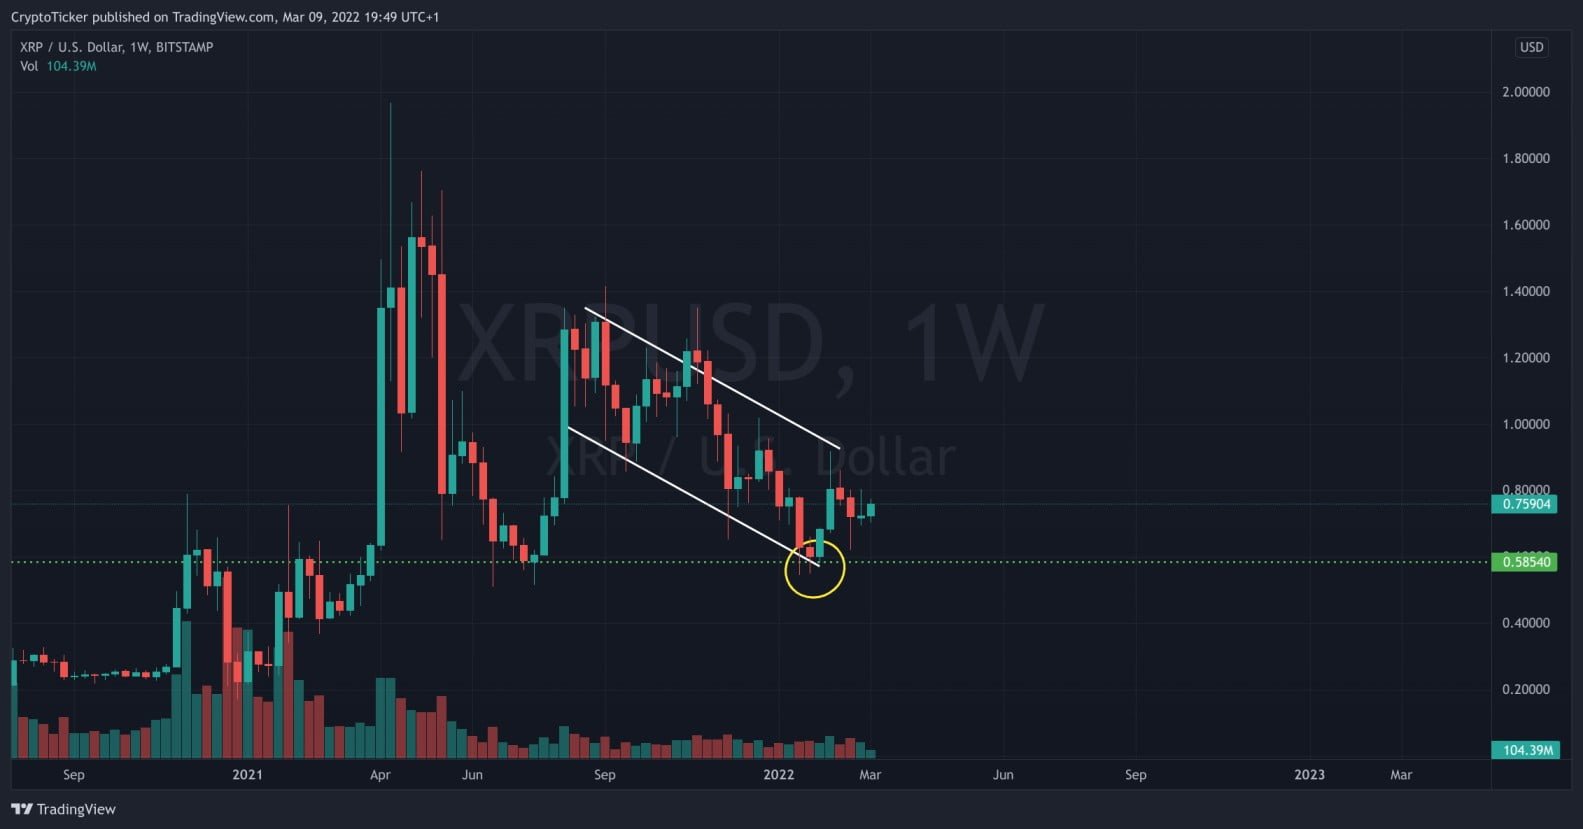 XRP/USD 1-week chart showing the break in the downtrend in XRP price